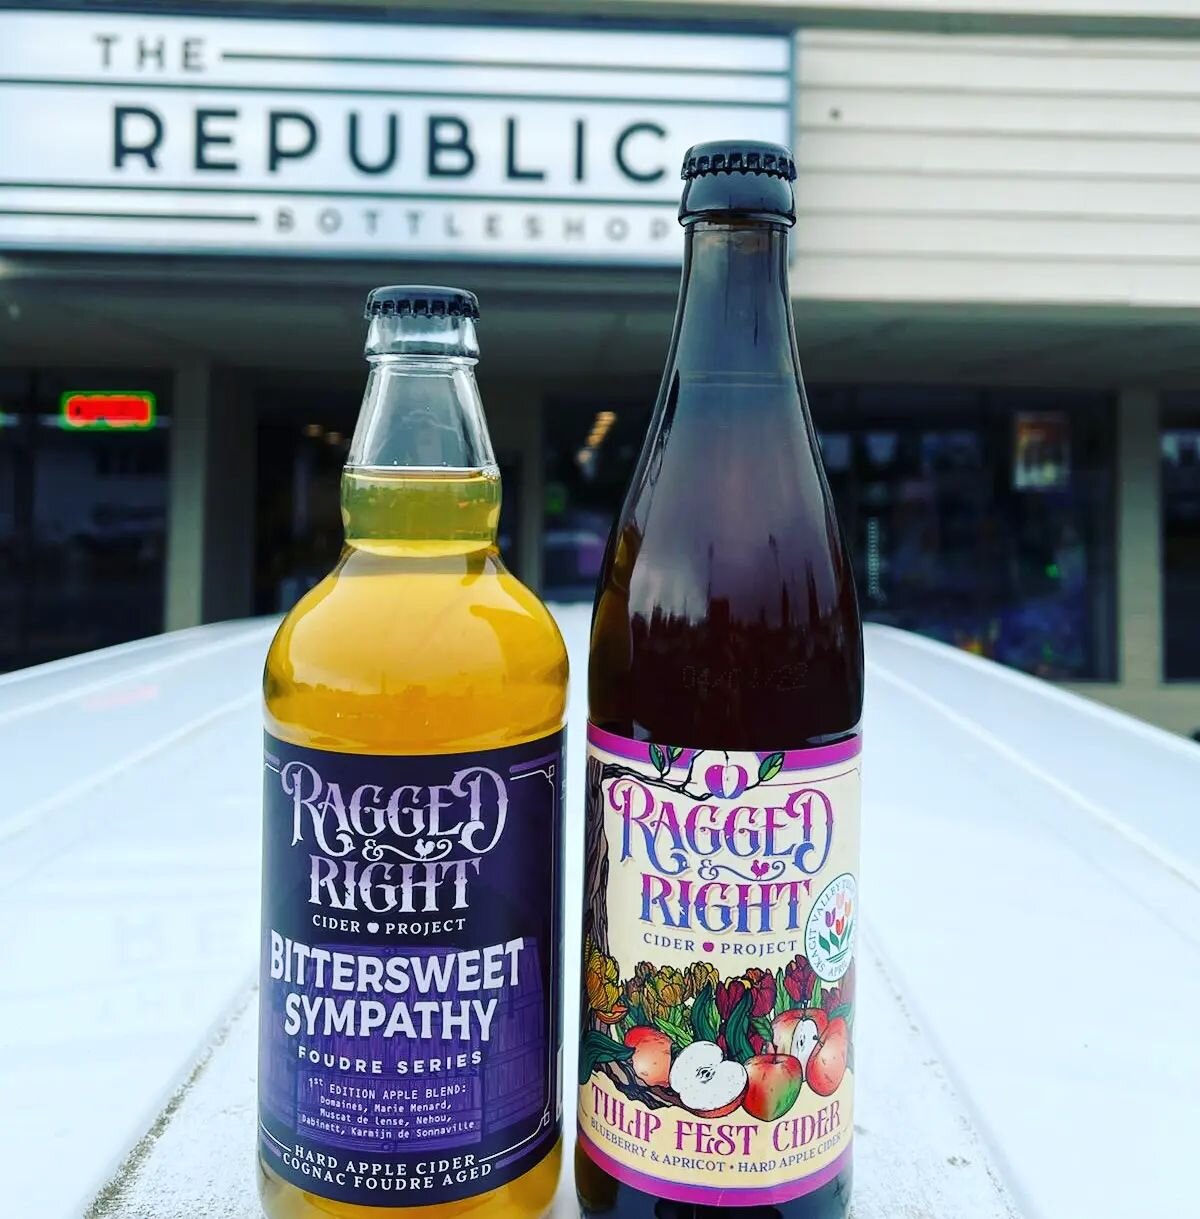 Just dropped two of our latest bottle offerings off to the good people of Marysville.
Snag our new Tulip Fest and the first of our Foudre Series: Bittersweet Sympathy at @therepublicbottleshop starting today!

#cider #hardcider #bottleshop